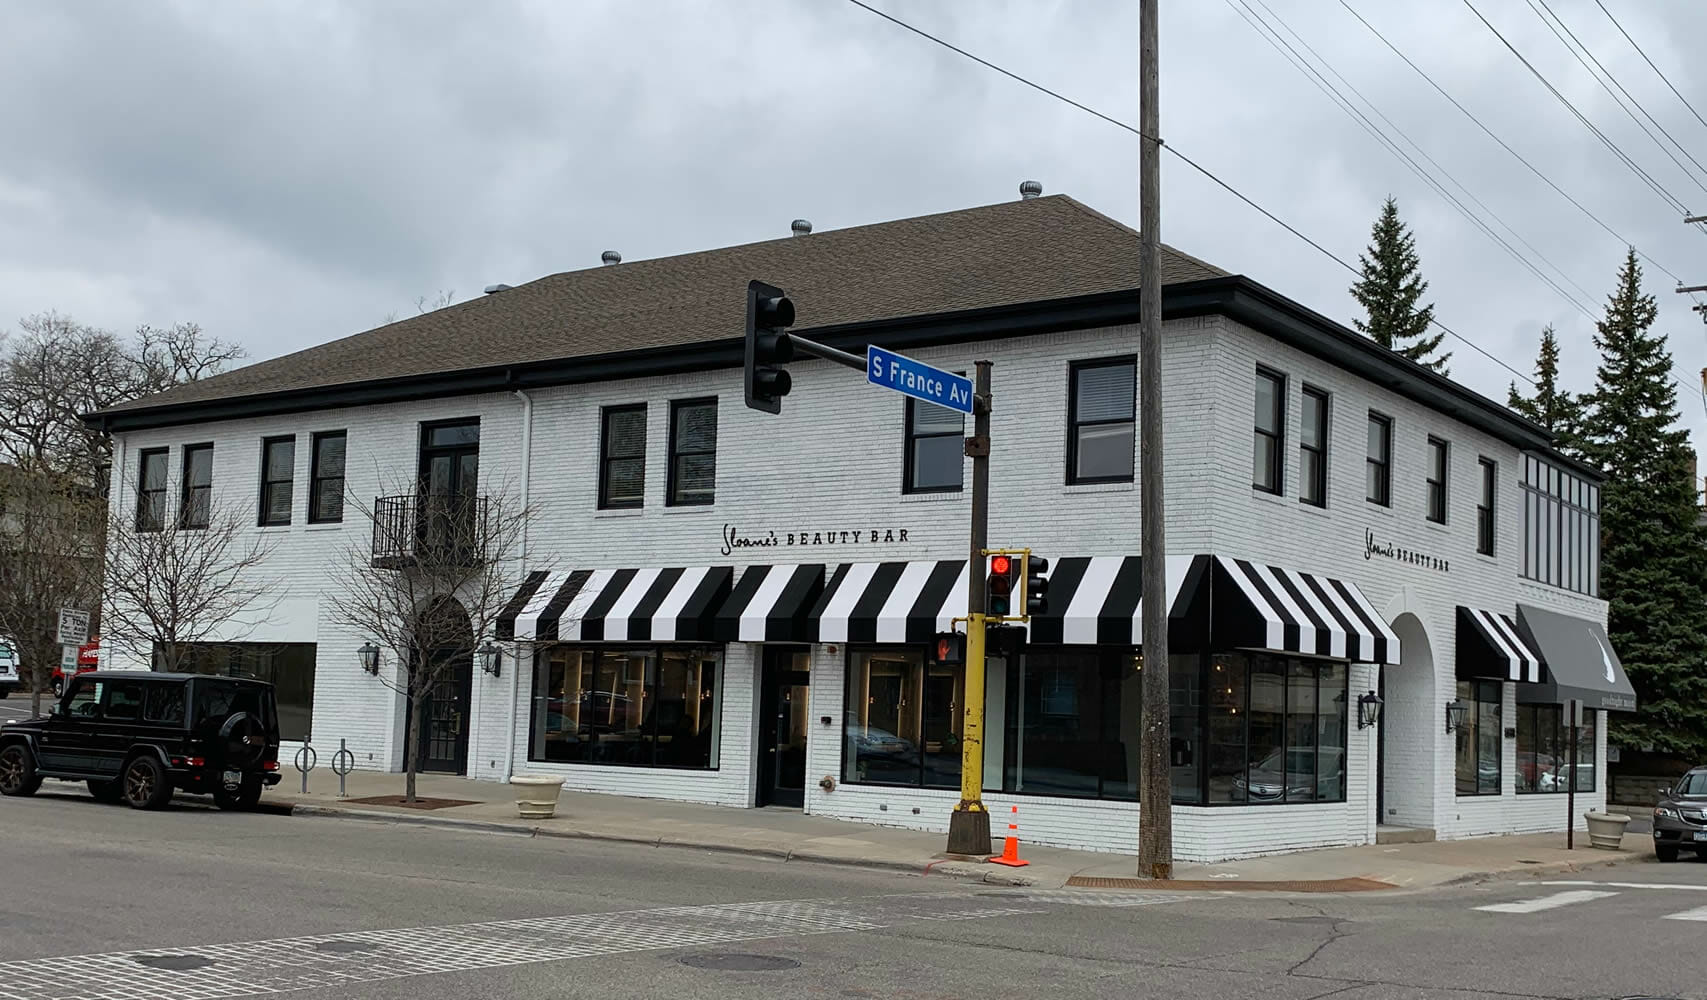 Commercial Awnings Manufactured By Acme Awning Minneapolis Mn Acme Awning